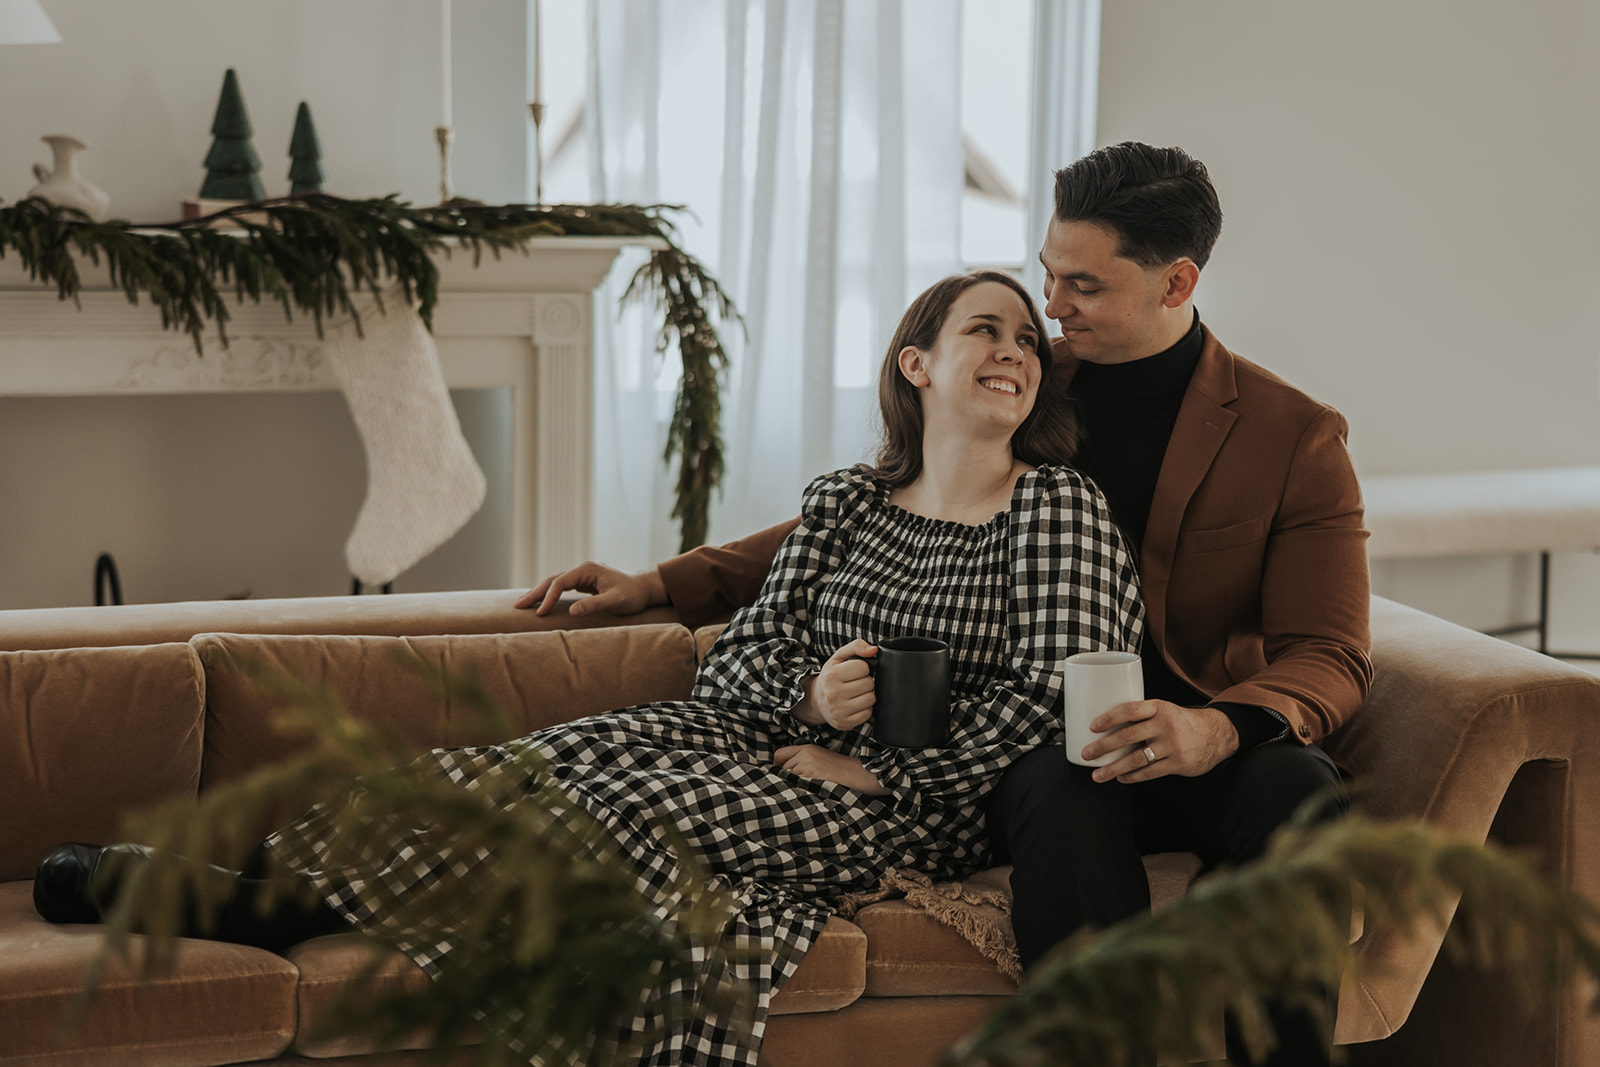 Man and woman pose together on a couch during a Christmas studio photoshoot